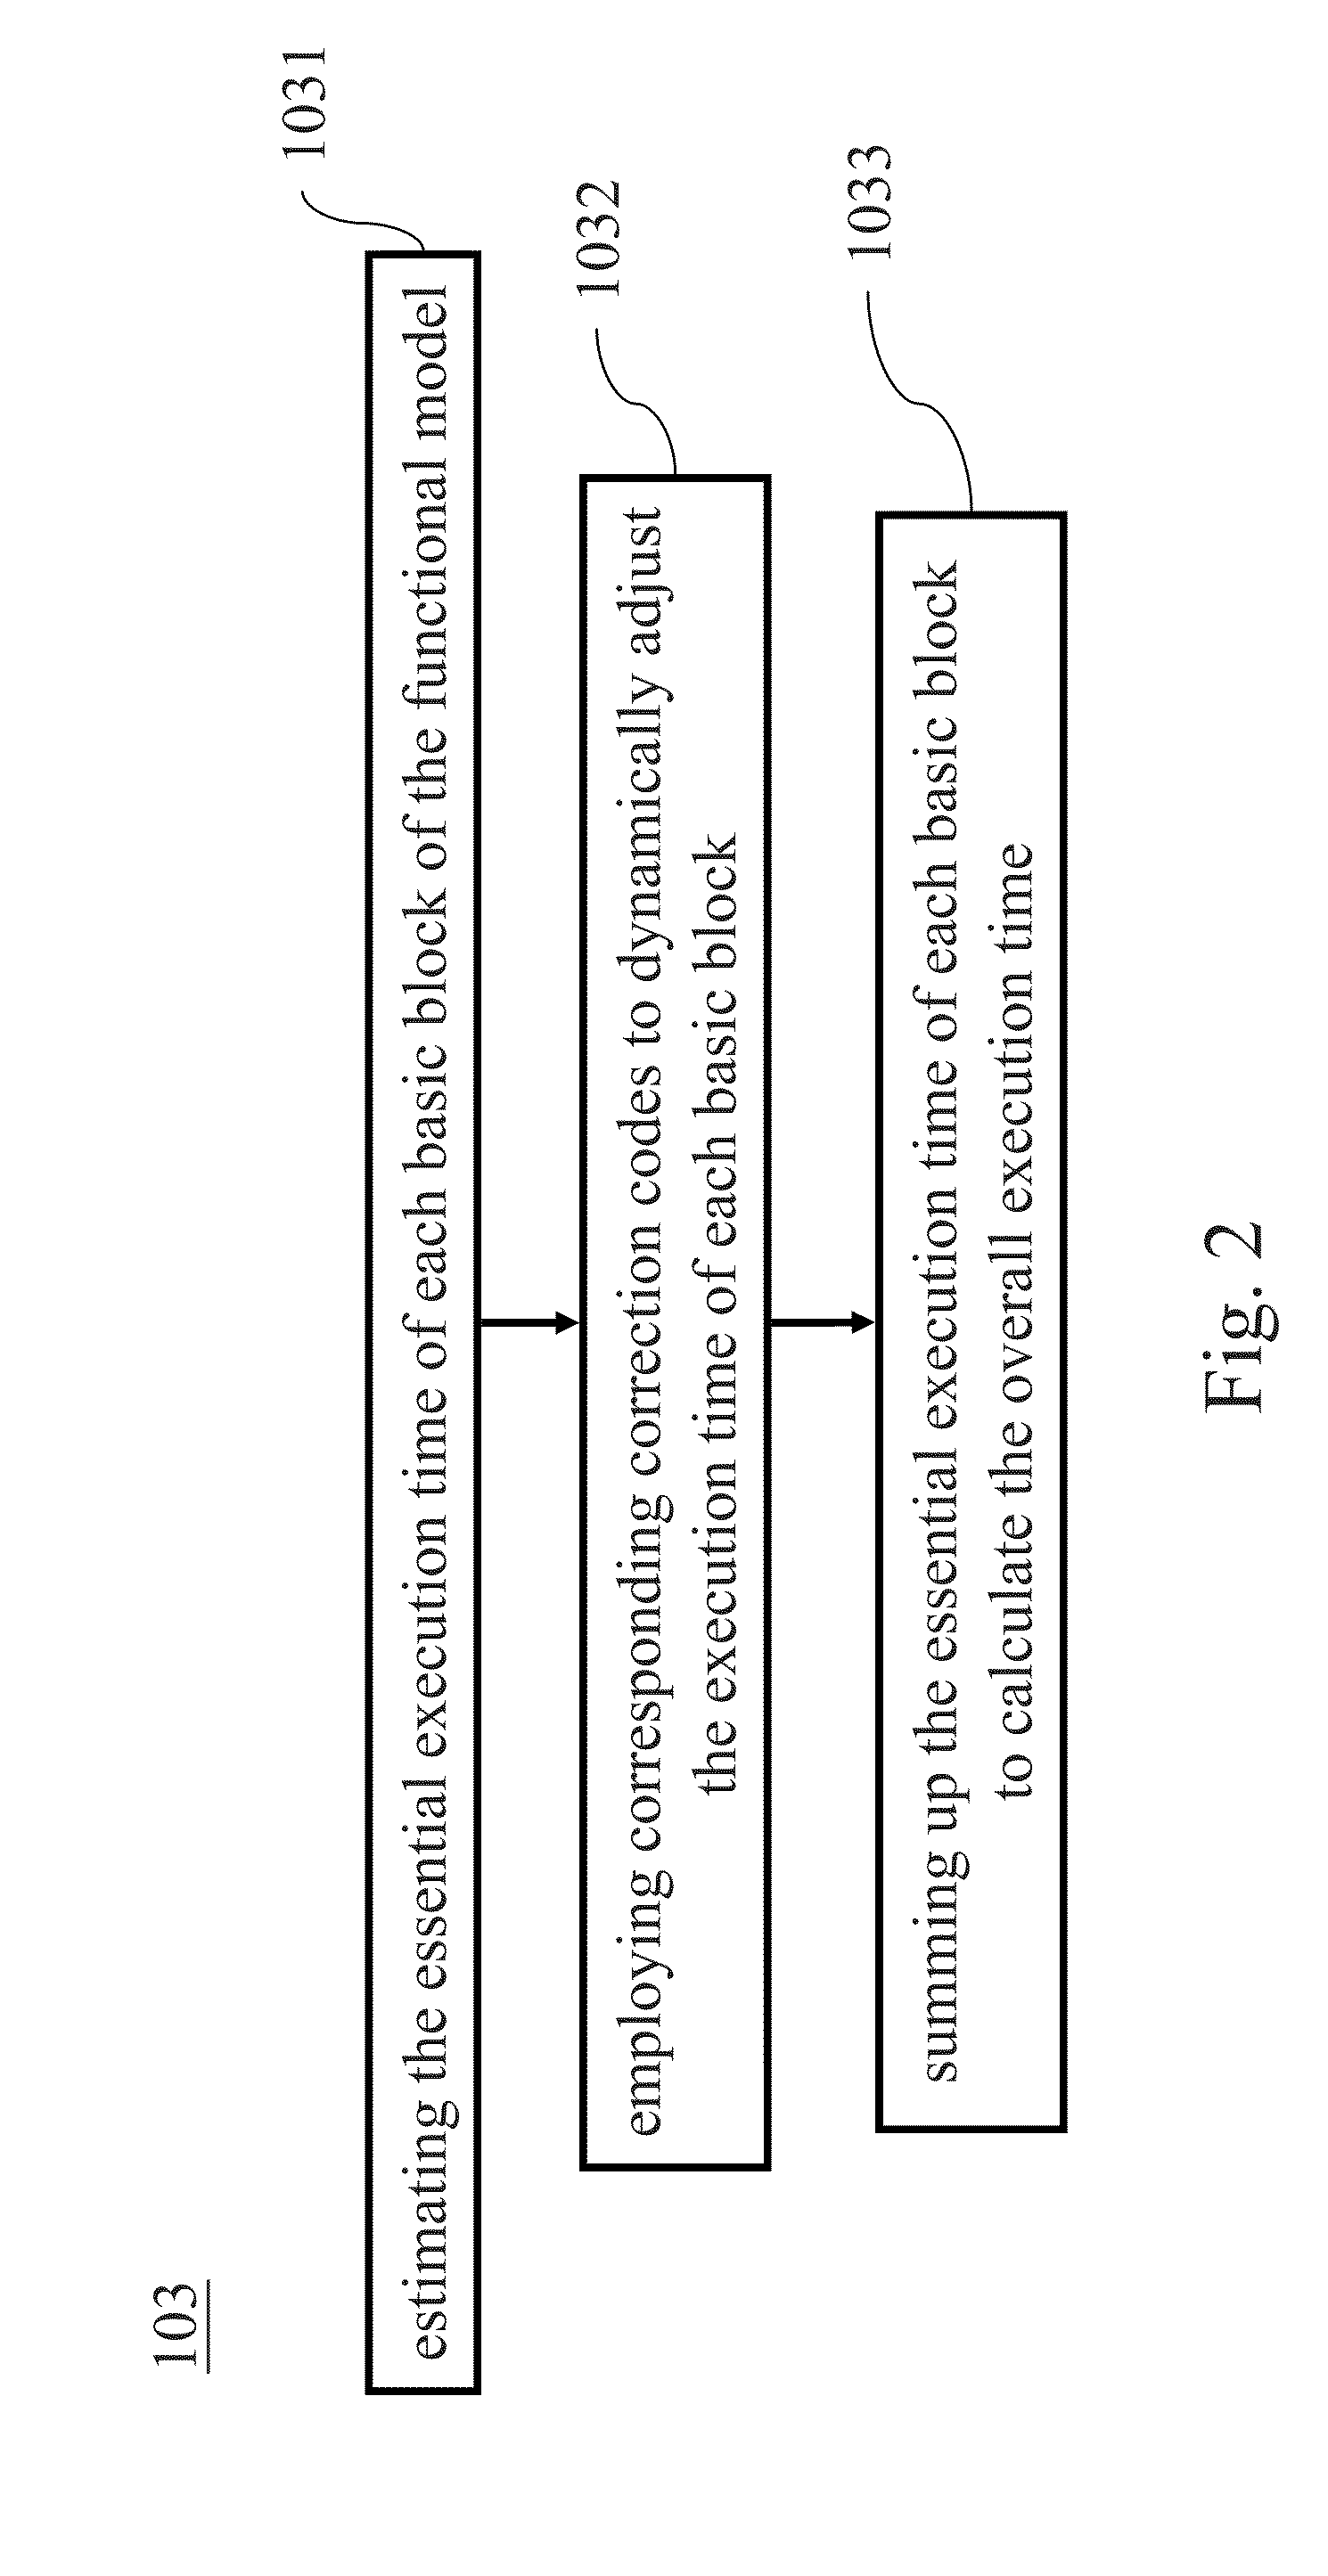 Method, System and Computer Readable Medium for Generating Software Transaction-Level Modeling (TLM) Model